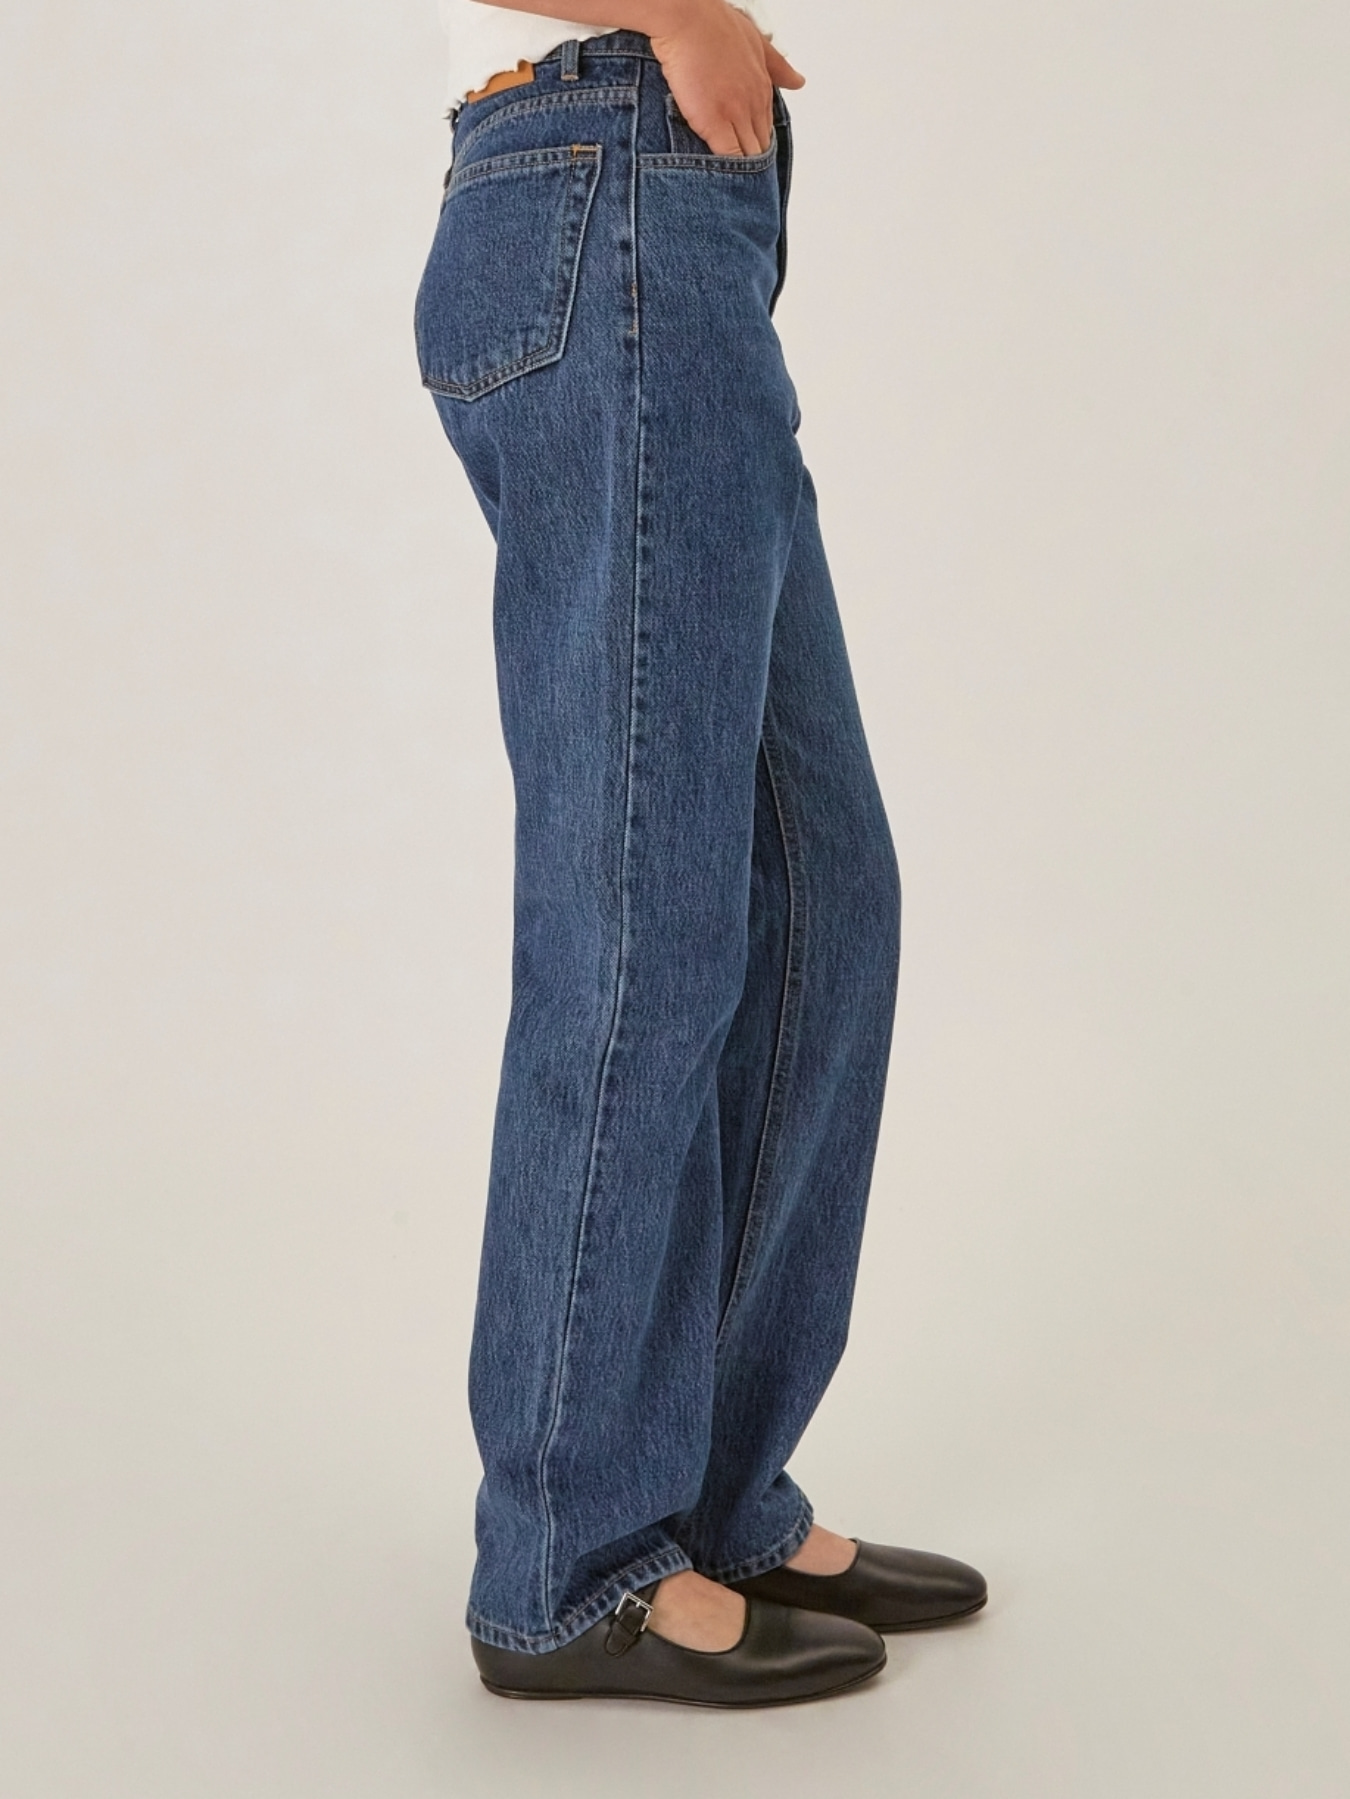 KATE HIGH-RISE JEANS by CONE DENIM